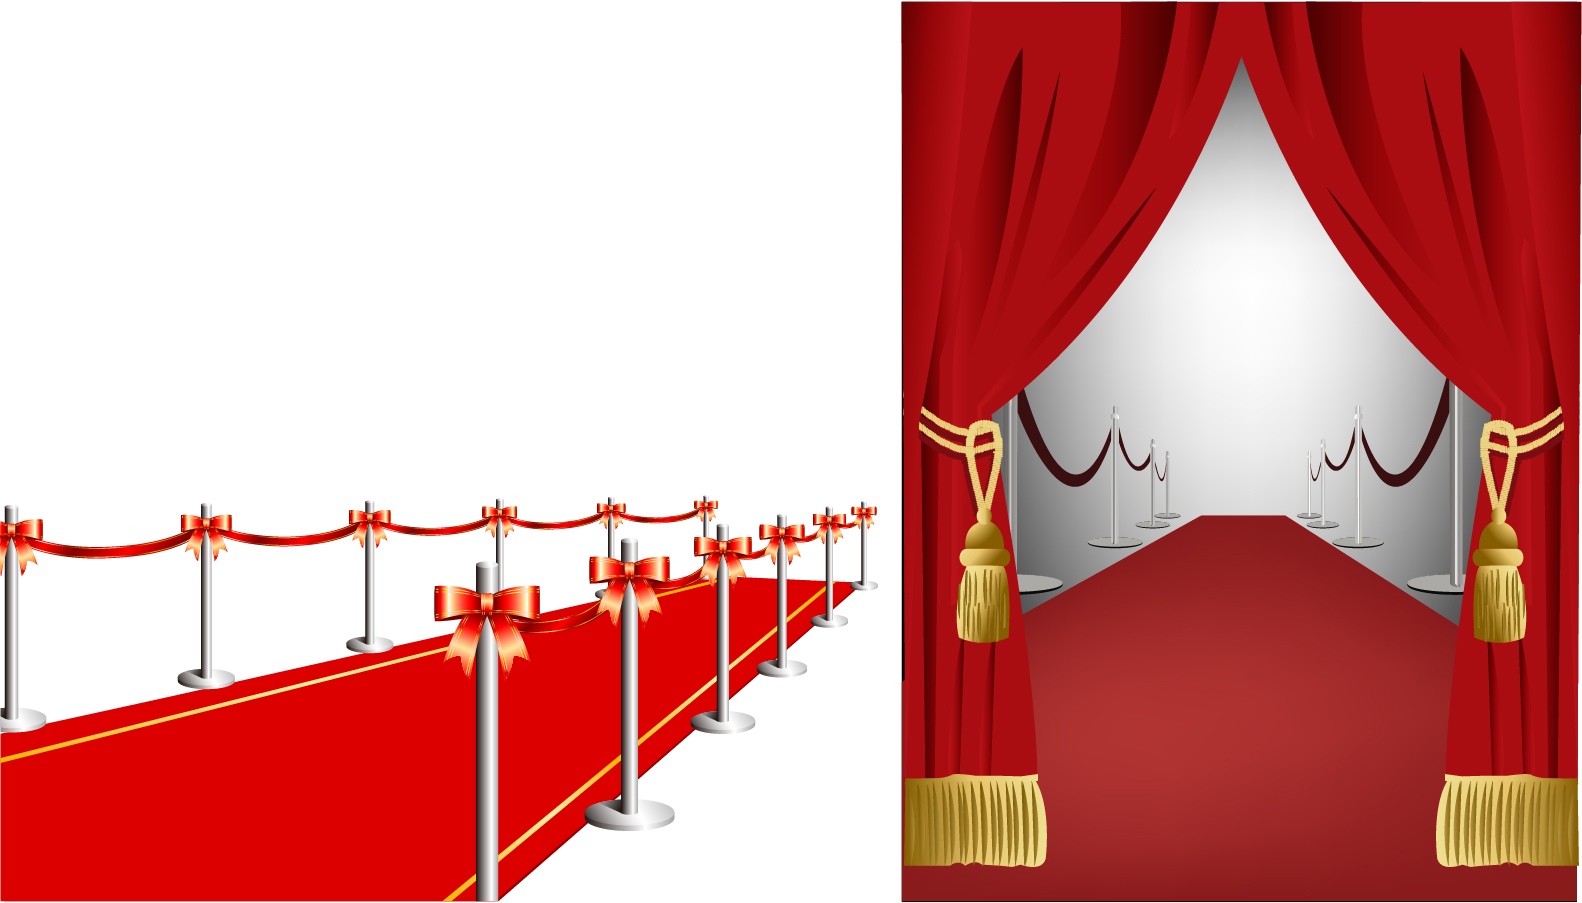 free clipart images red carpet - photo #4